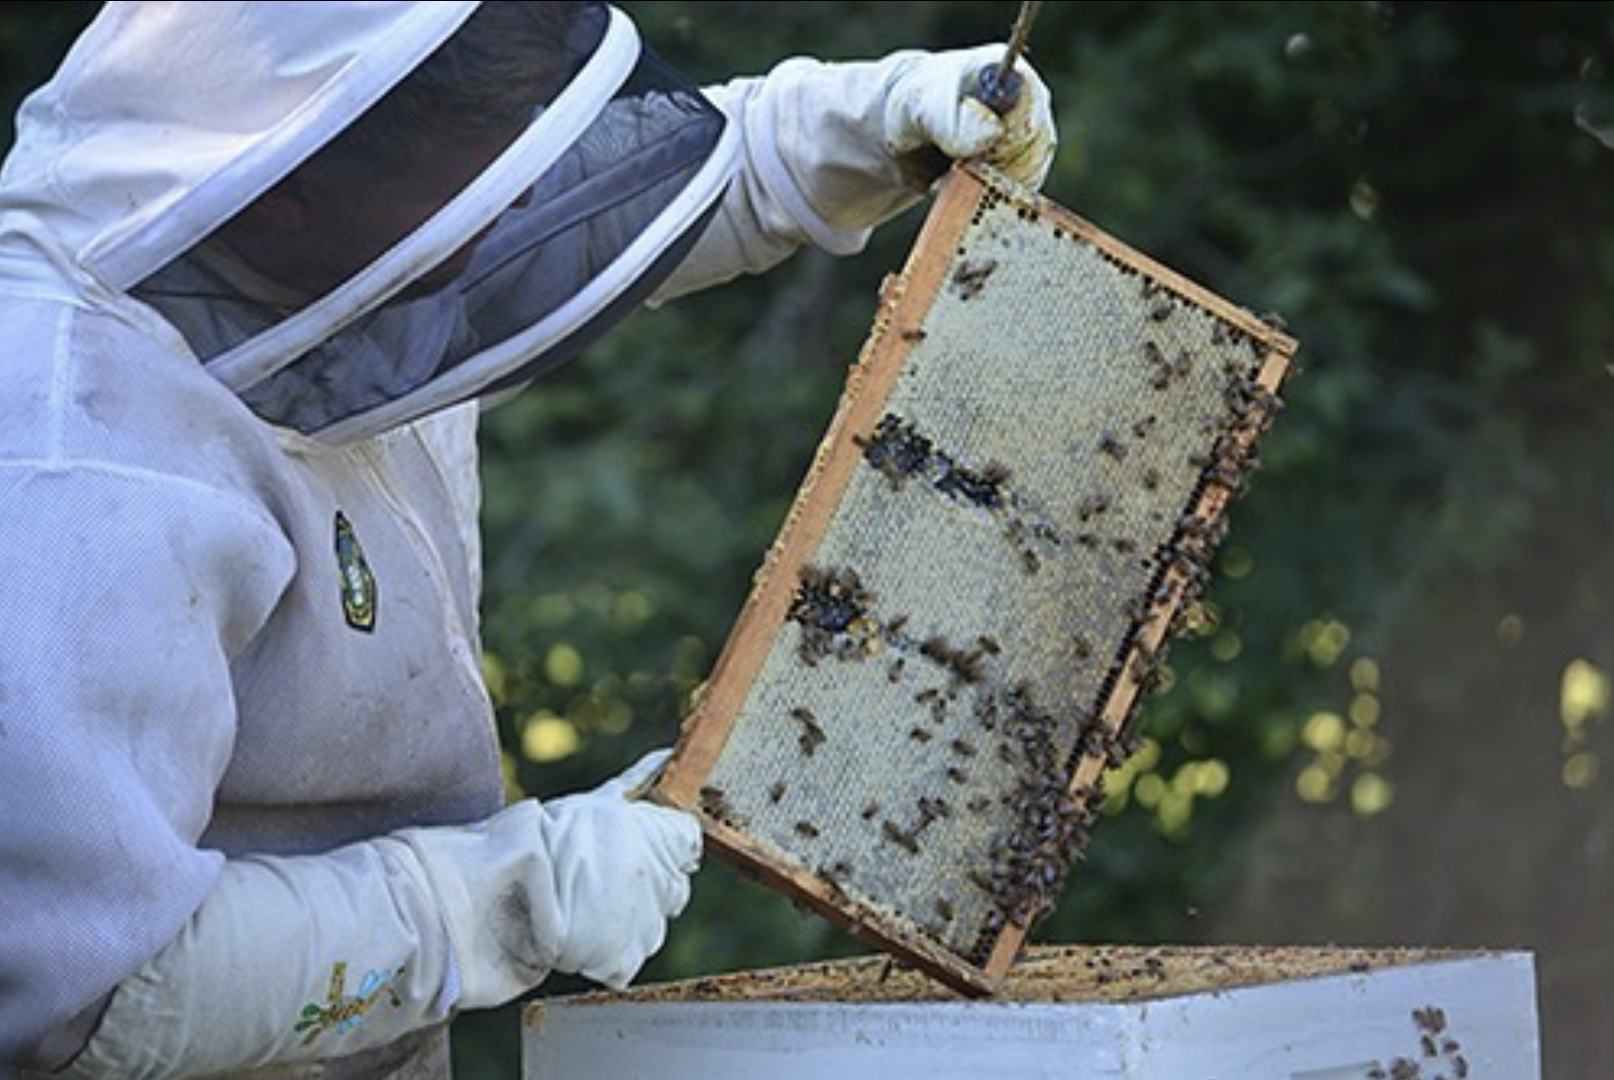 Beekeeping Club with hive